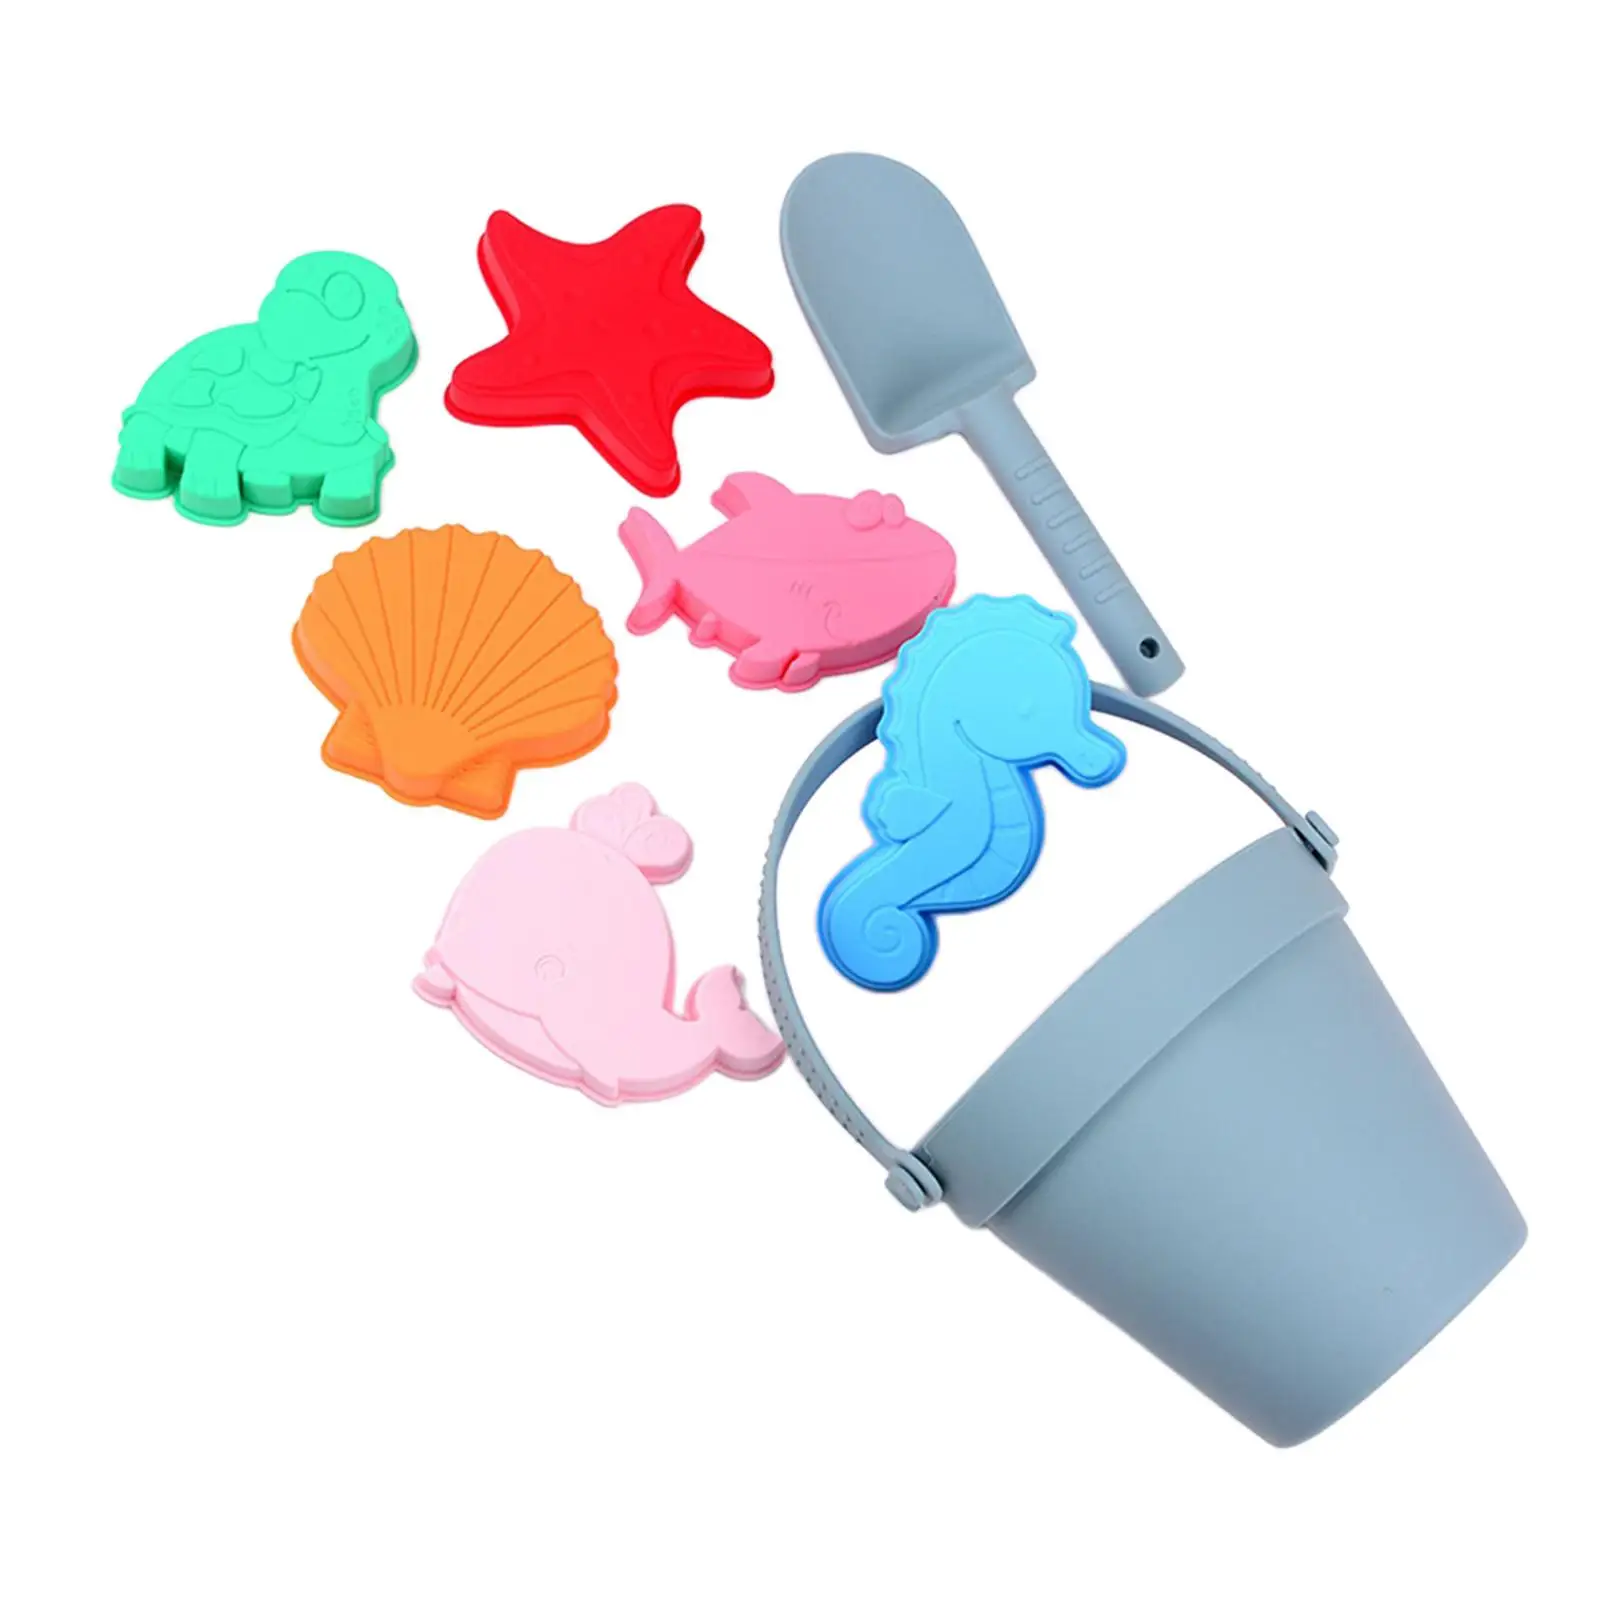 8 Pieces Silicone Sand Toys Set Beach Bucket and Spade Set Silicone Beach Toys for Outdoor